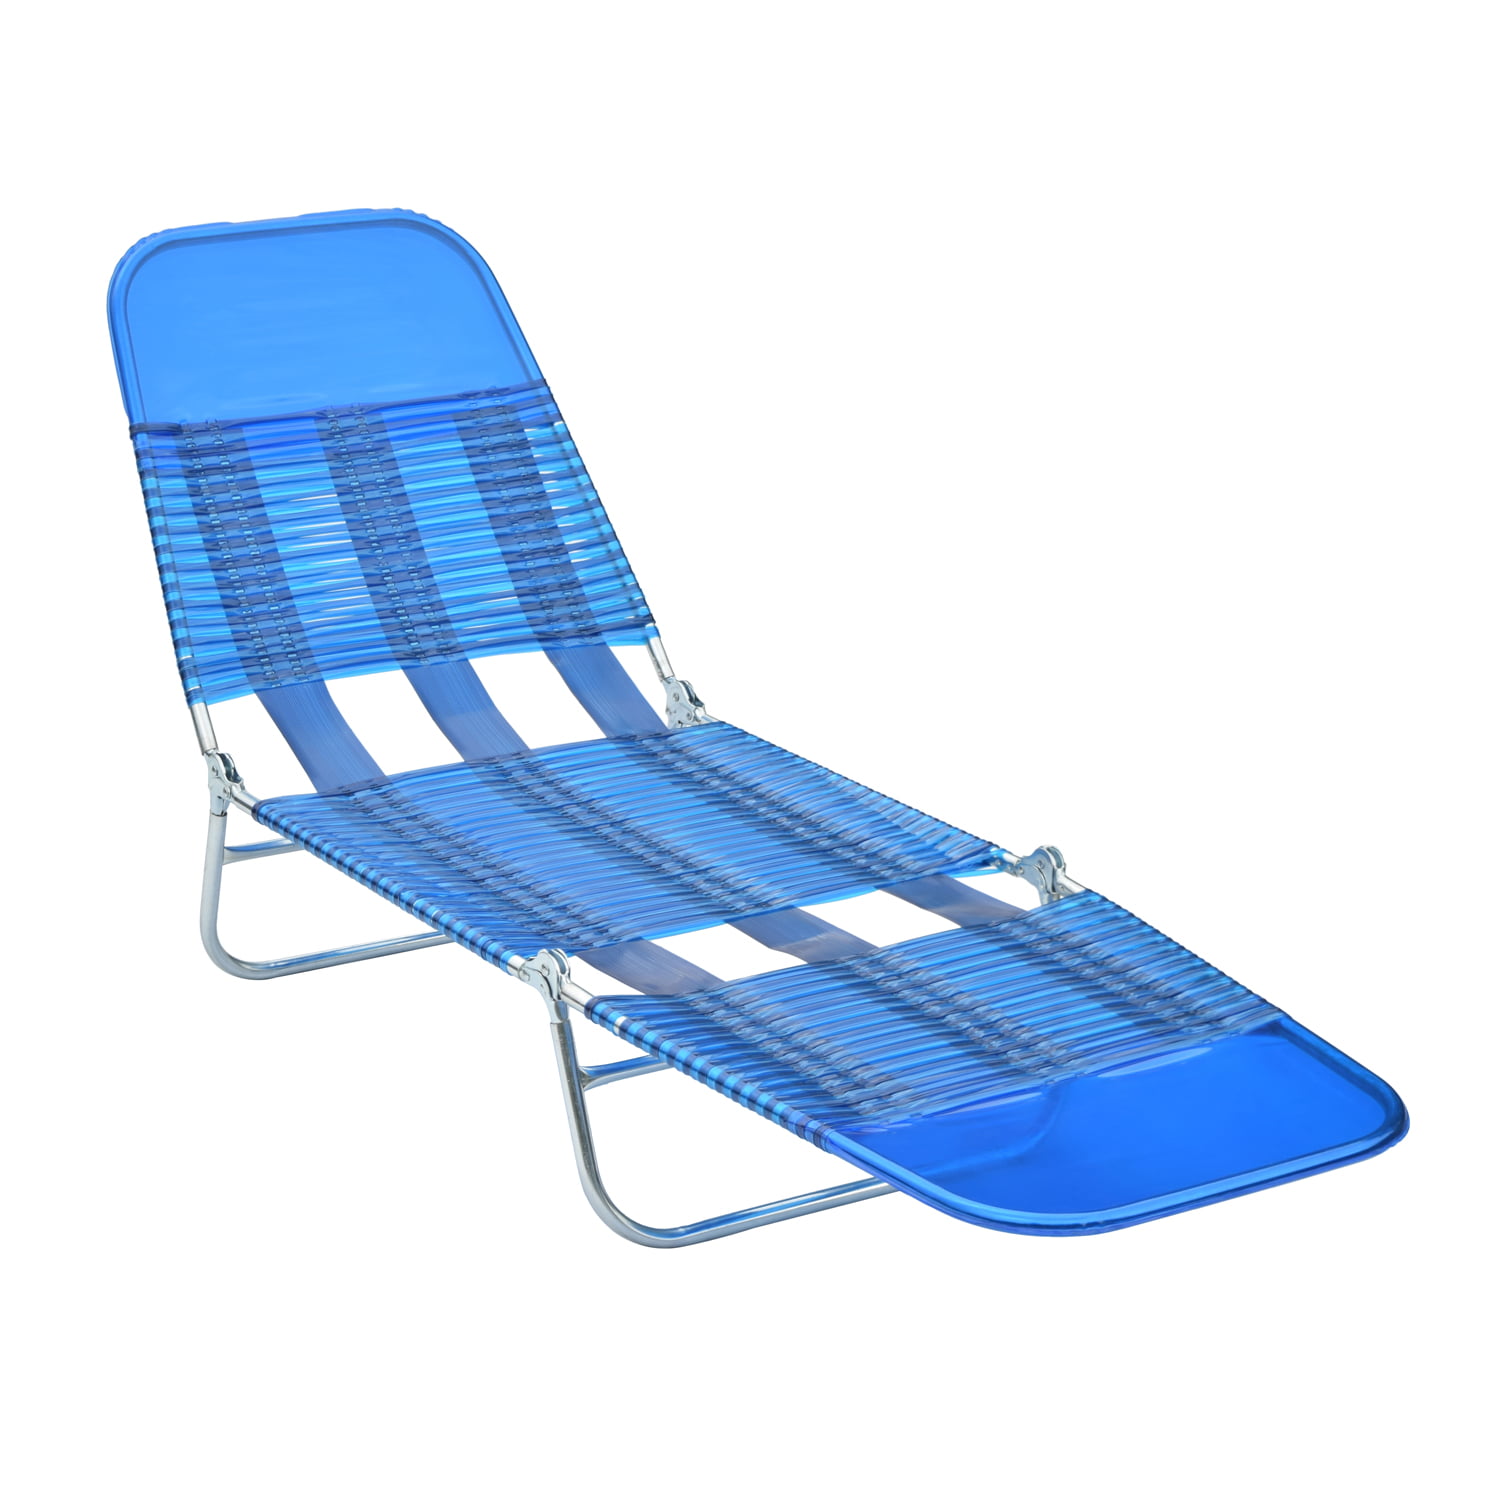 stephengardendesign: Jelly Lounge Chair